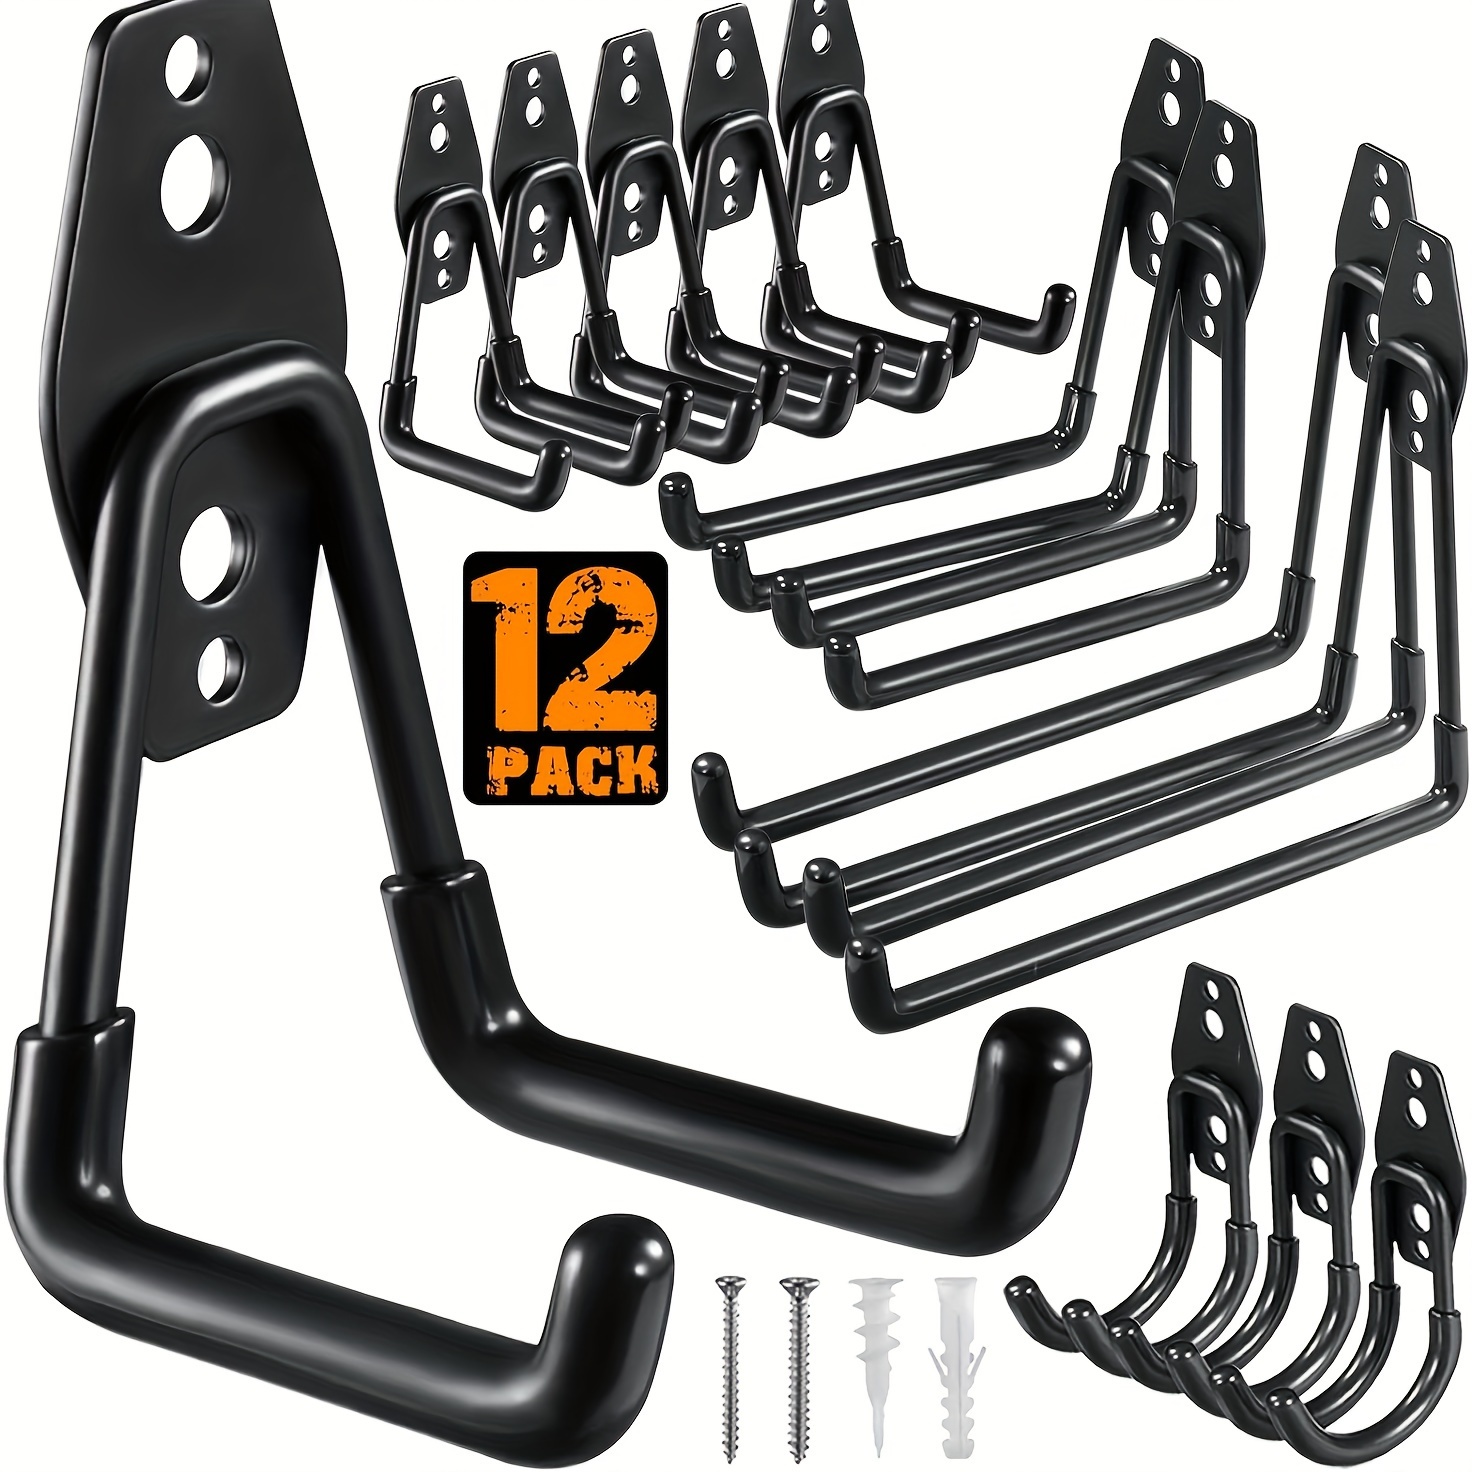 

12pcs Garage Hooks, Heavy Duty, Utility Steel, Storage Hooks, Wall Mount, Organize Power Tools, Ladders, Bulk Items, Bicycles, Ropes And More Equipment